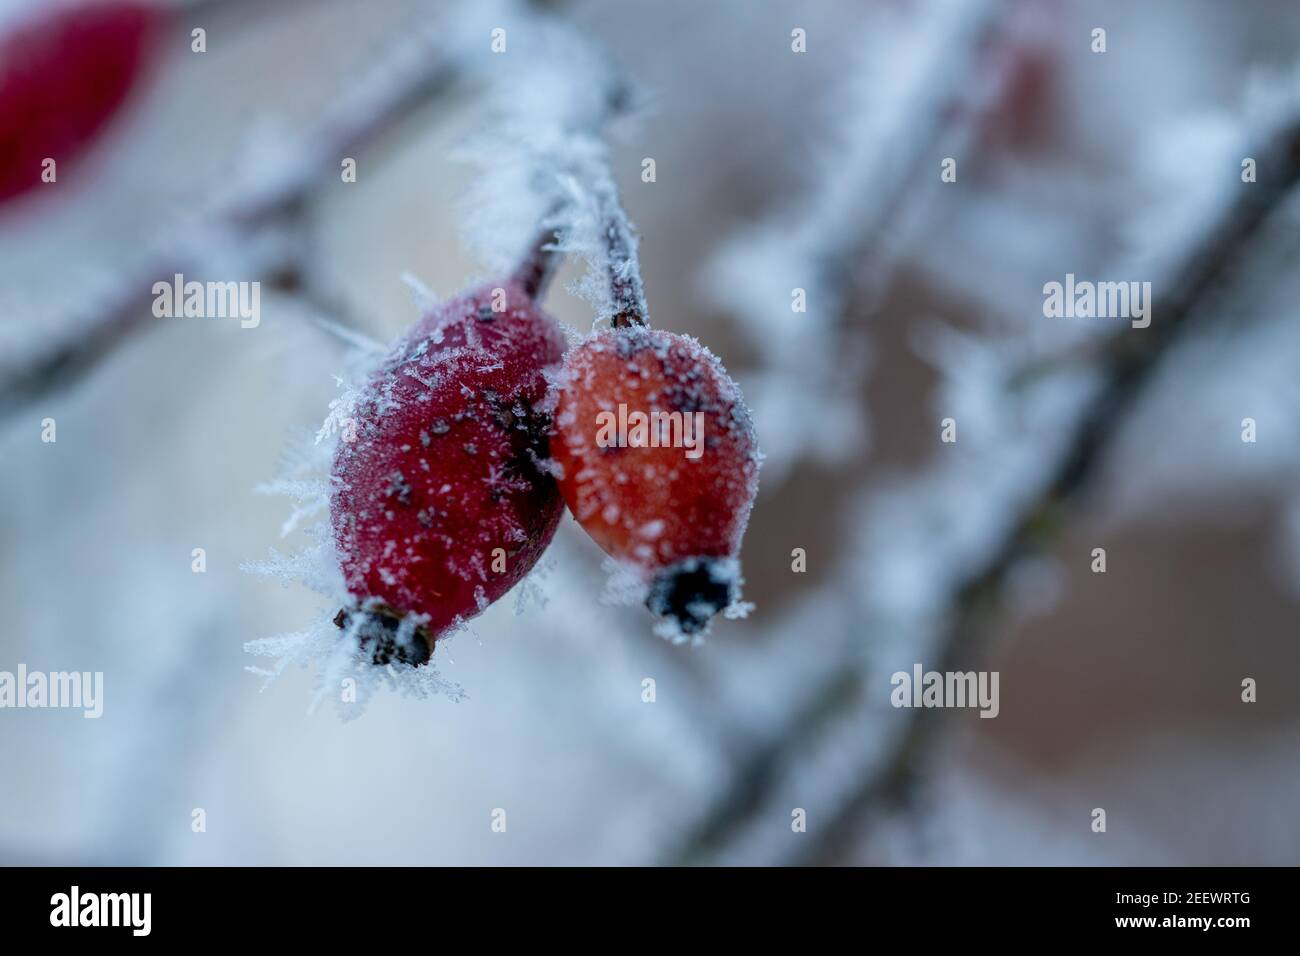 The red fruits of the dog rose, the rose hips are covered with hoarfrost and ice crystals after a cold night. Stock Photo